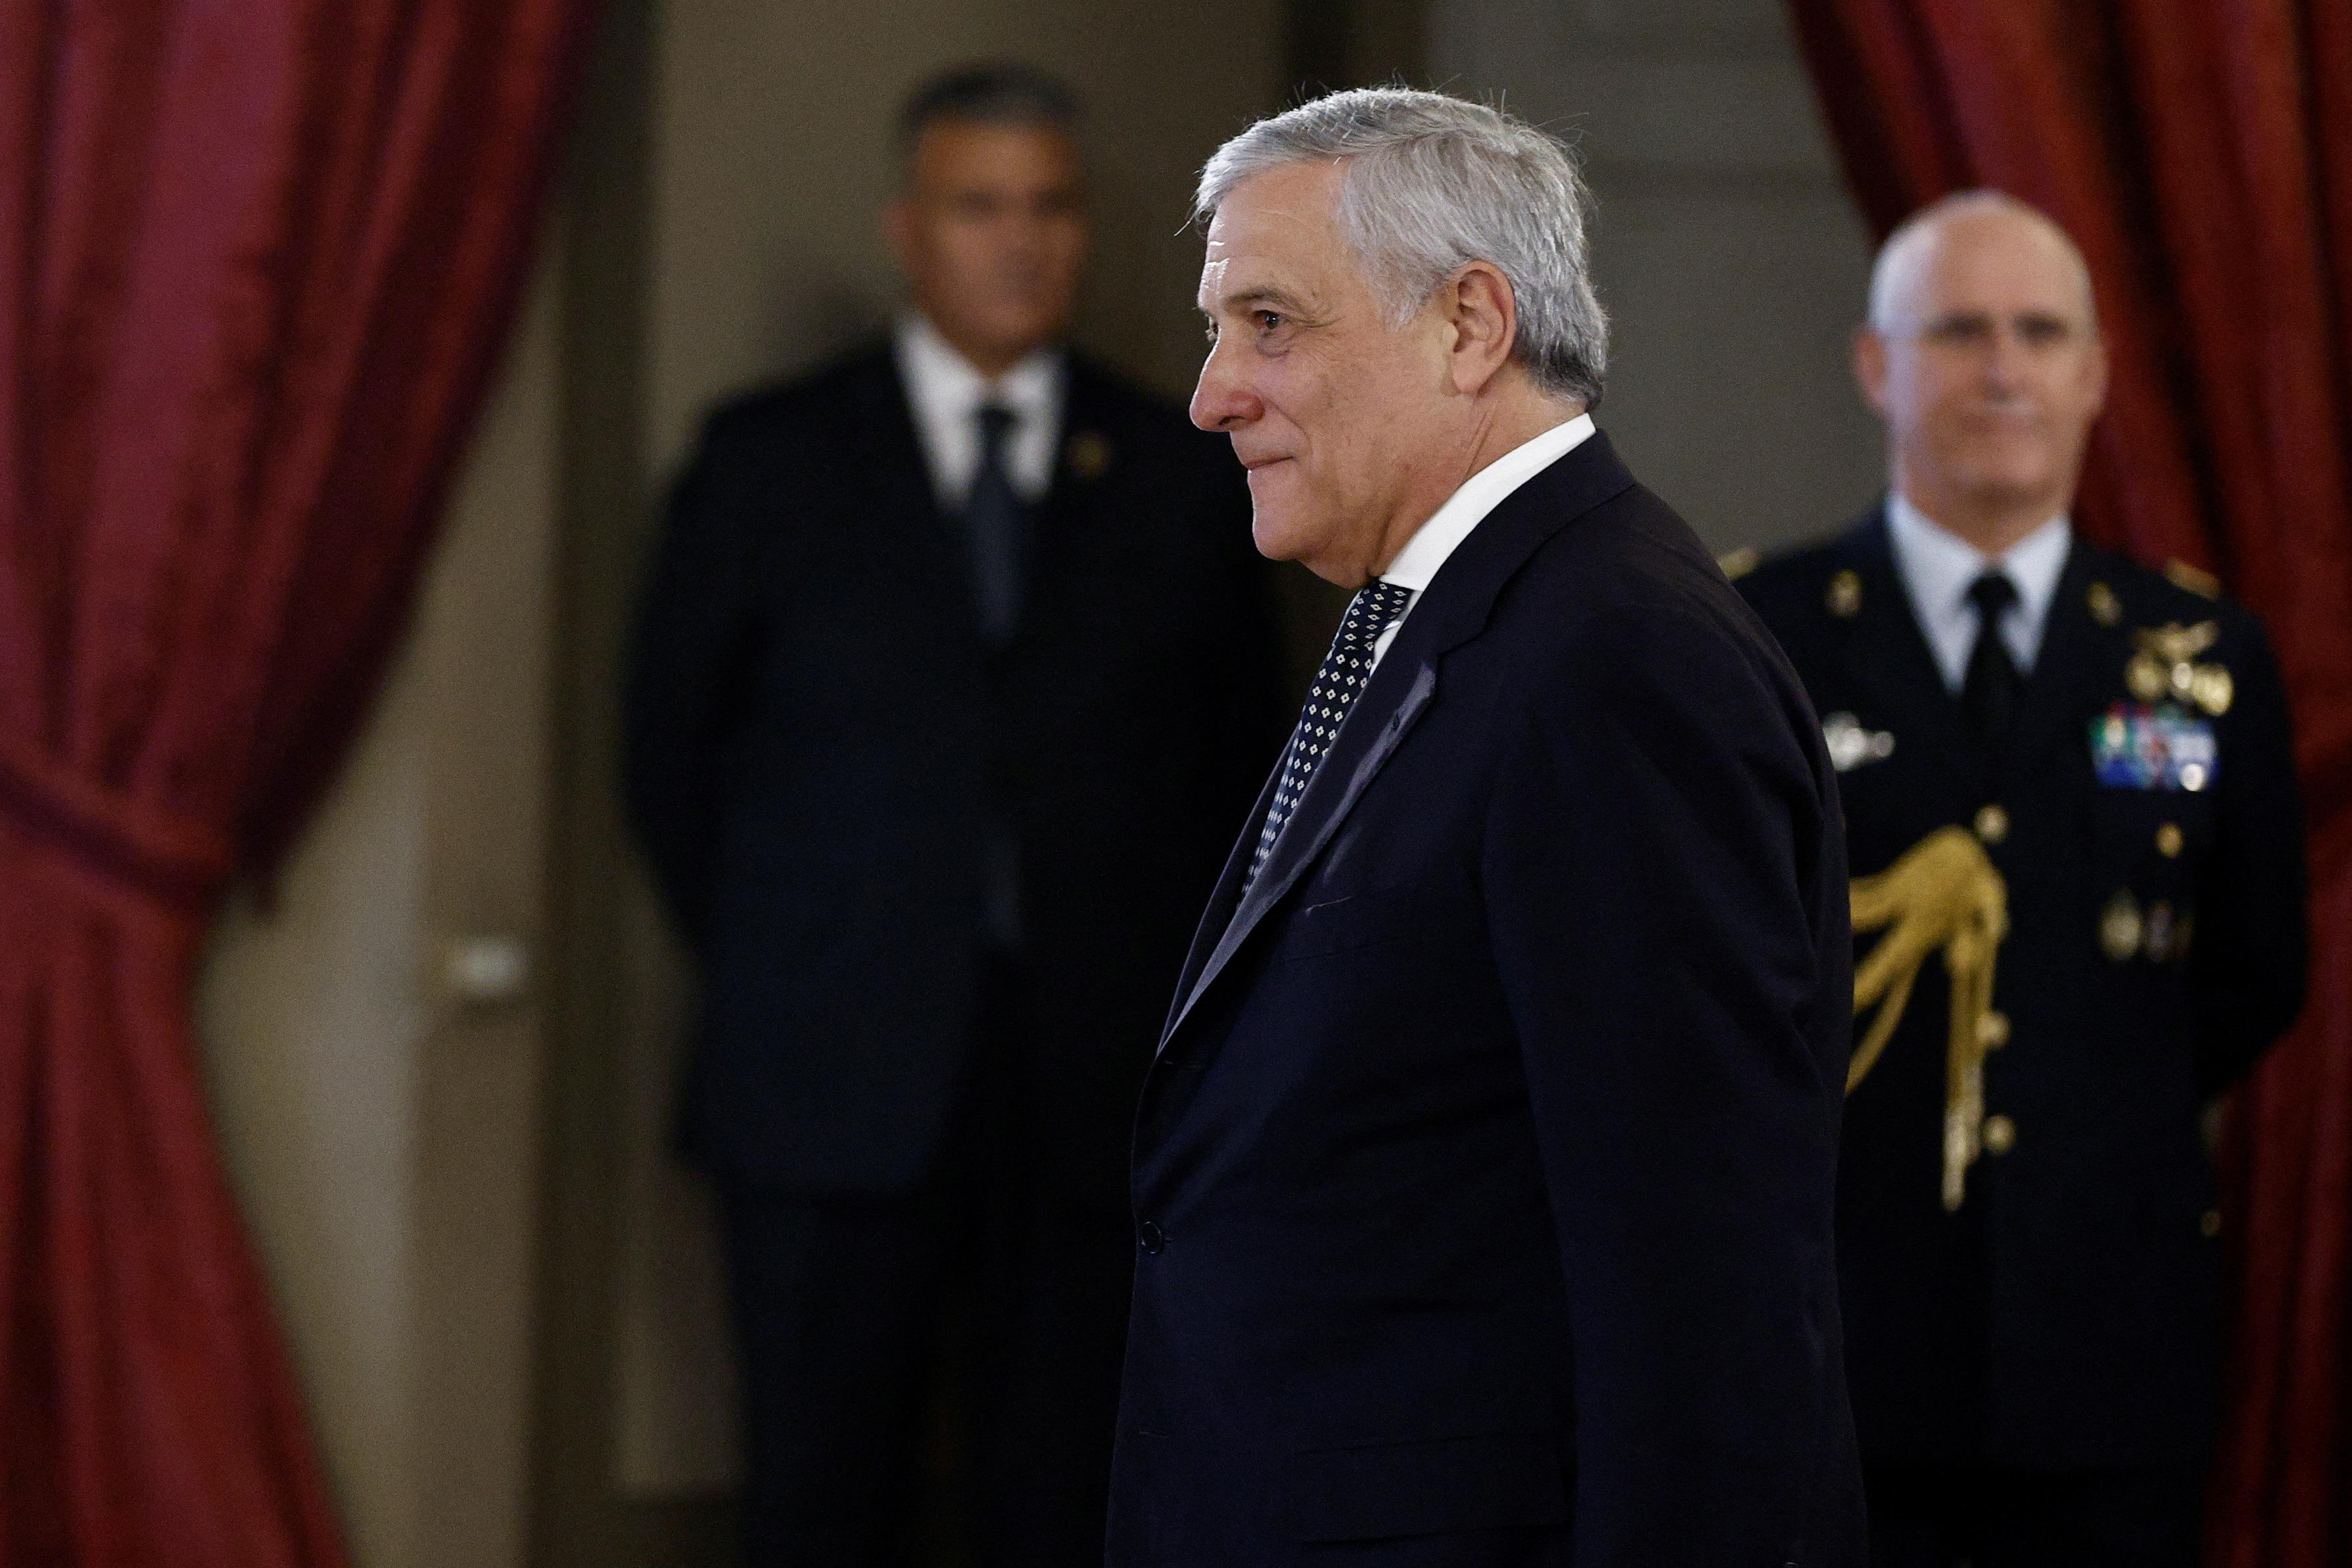 Italian PM Meloni and deputy PM Tajani attend a swearing-in ceremony at the Quirinale Palace, in Rome